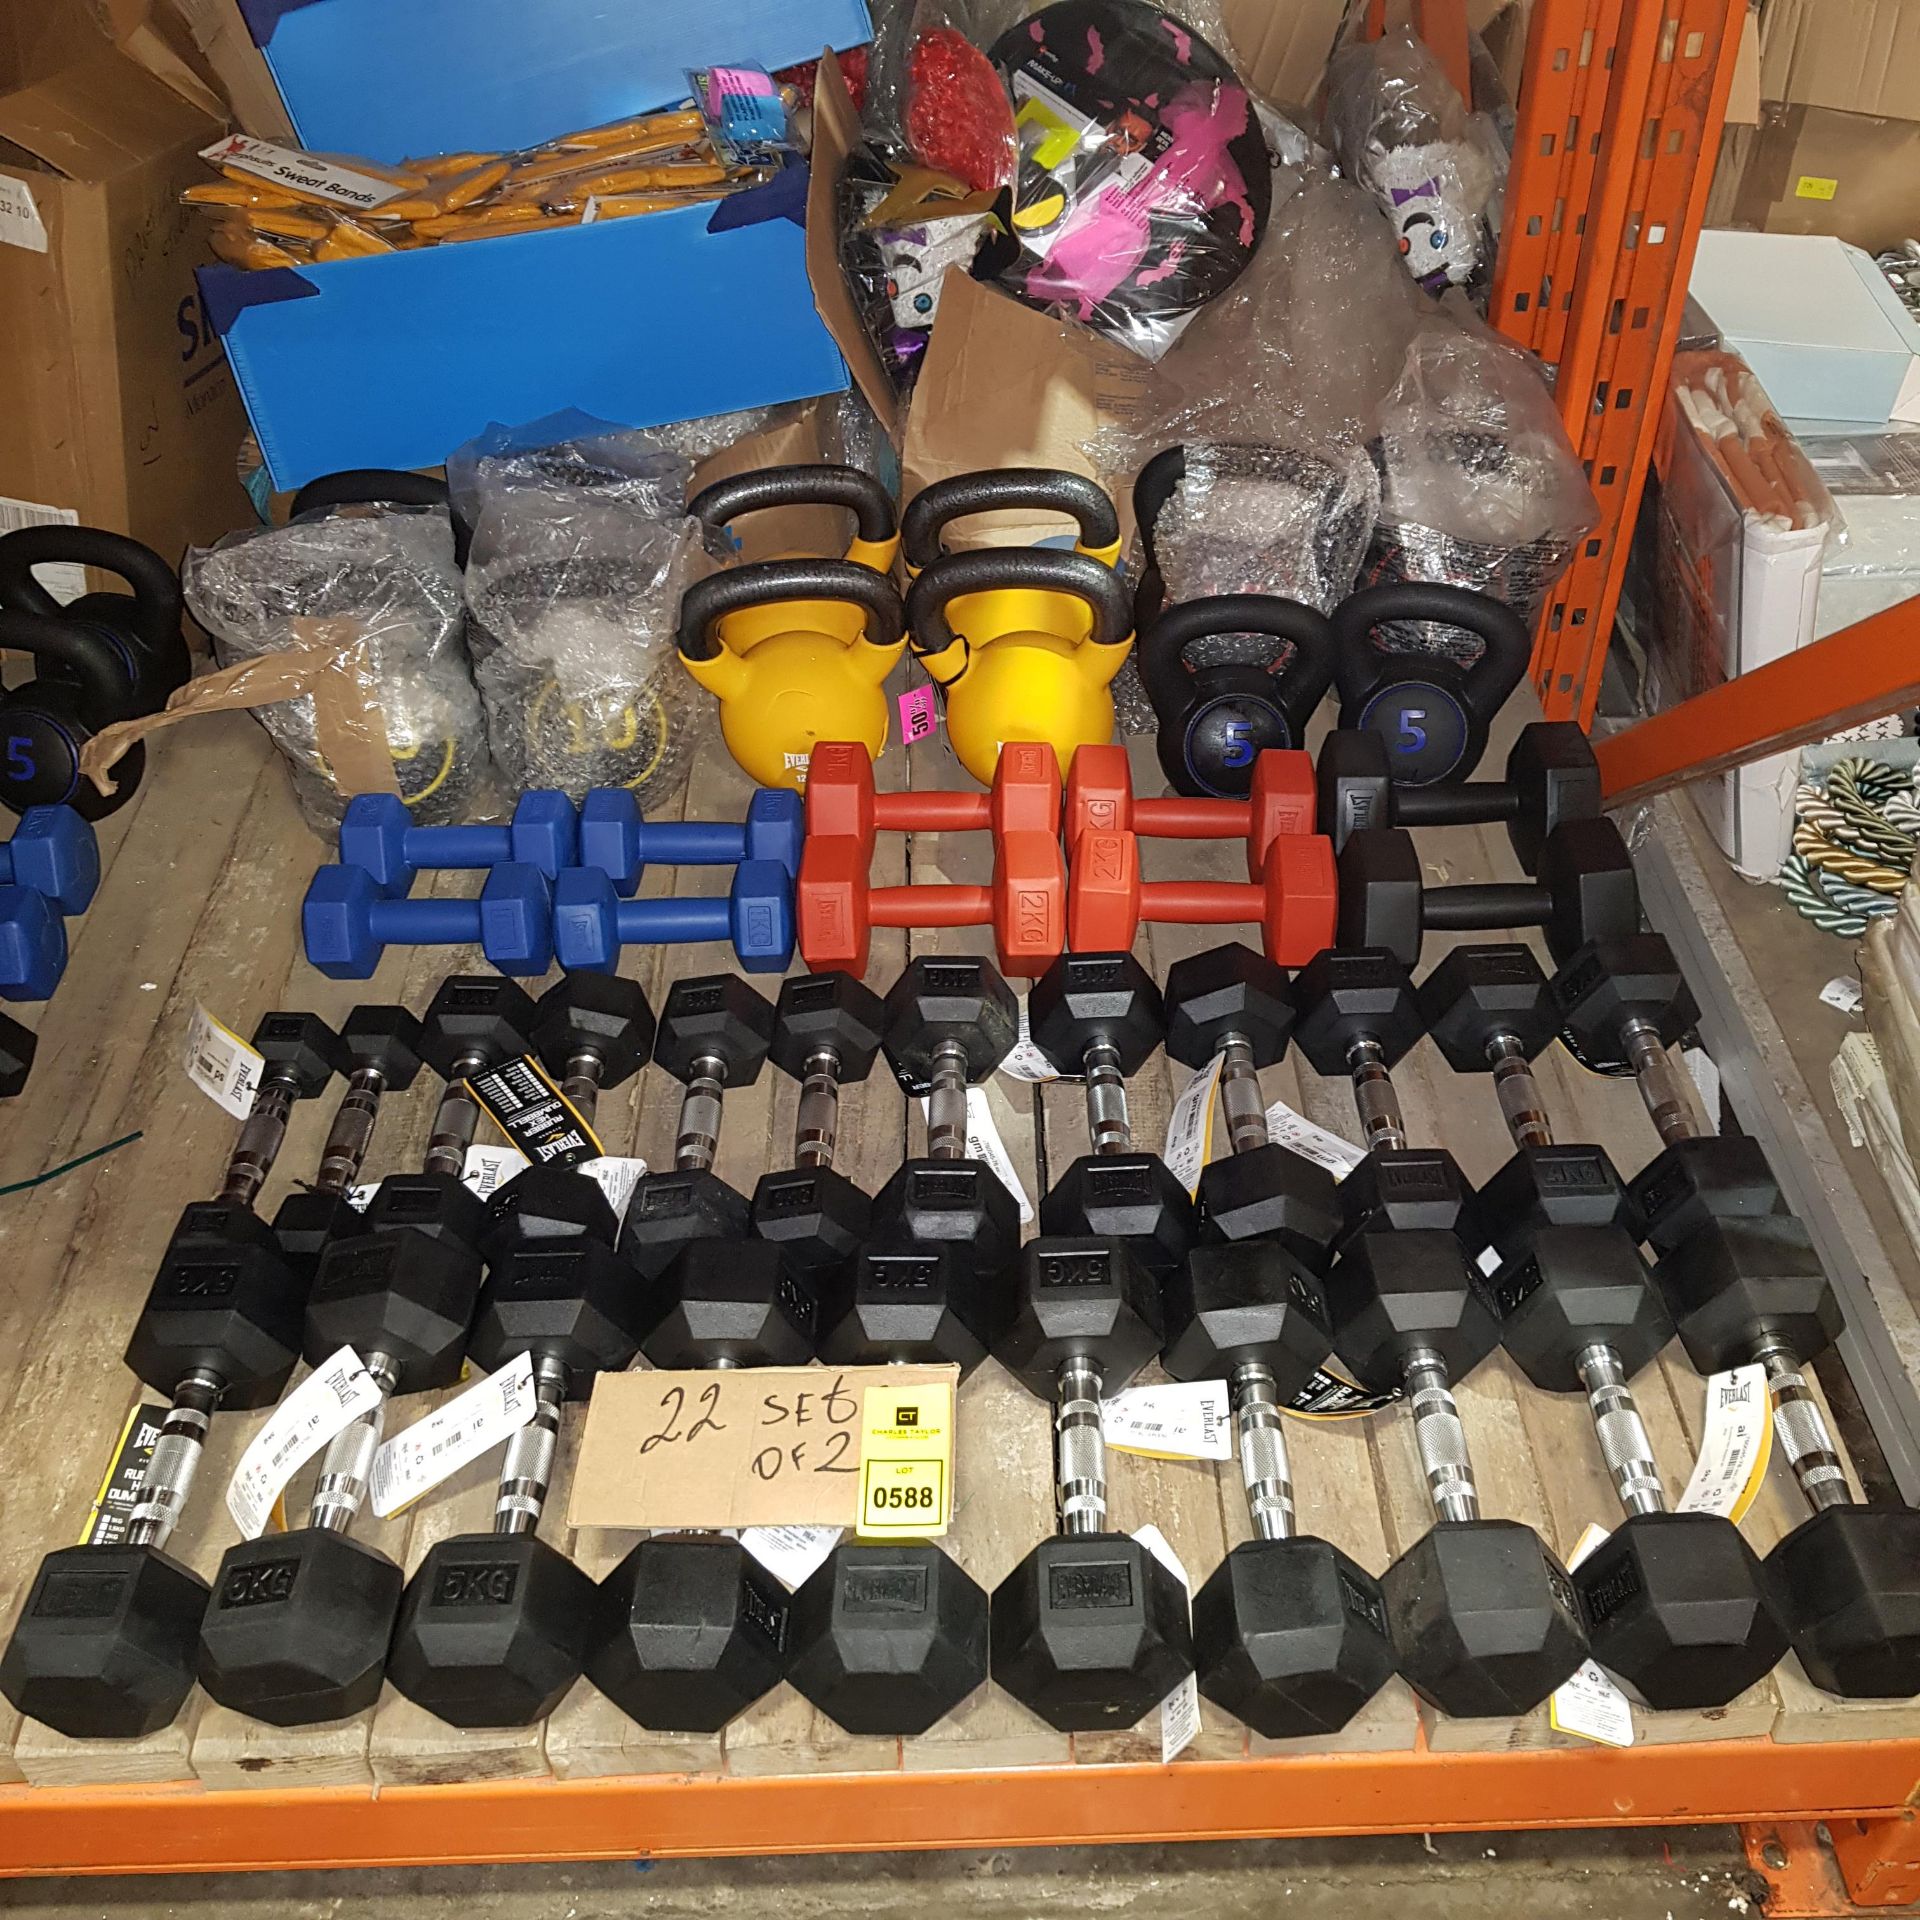 44 PIECE MIXED GYM LOT CONTAINING EVERLAST RUBBER HEX SETS OF 2 DUMBELLS - 3 KG / 5 KG / KETTLE